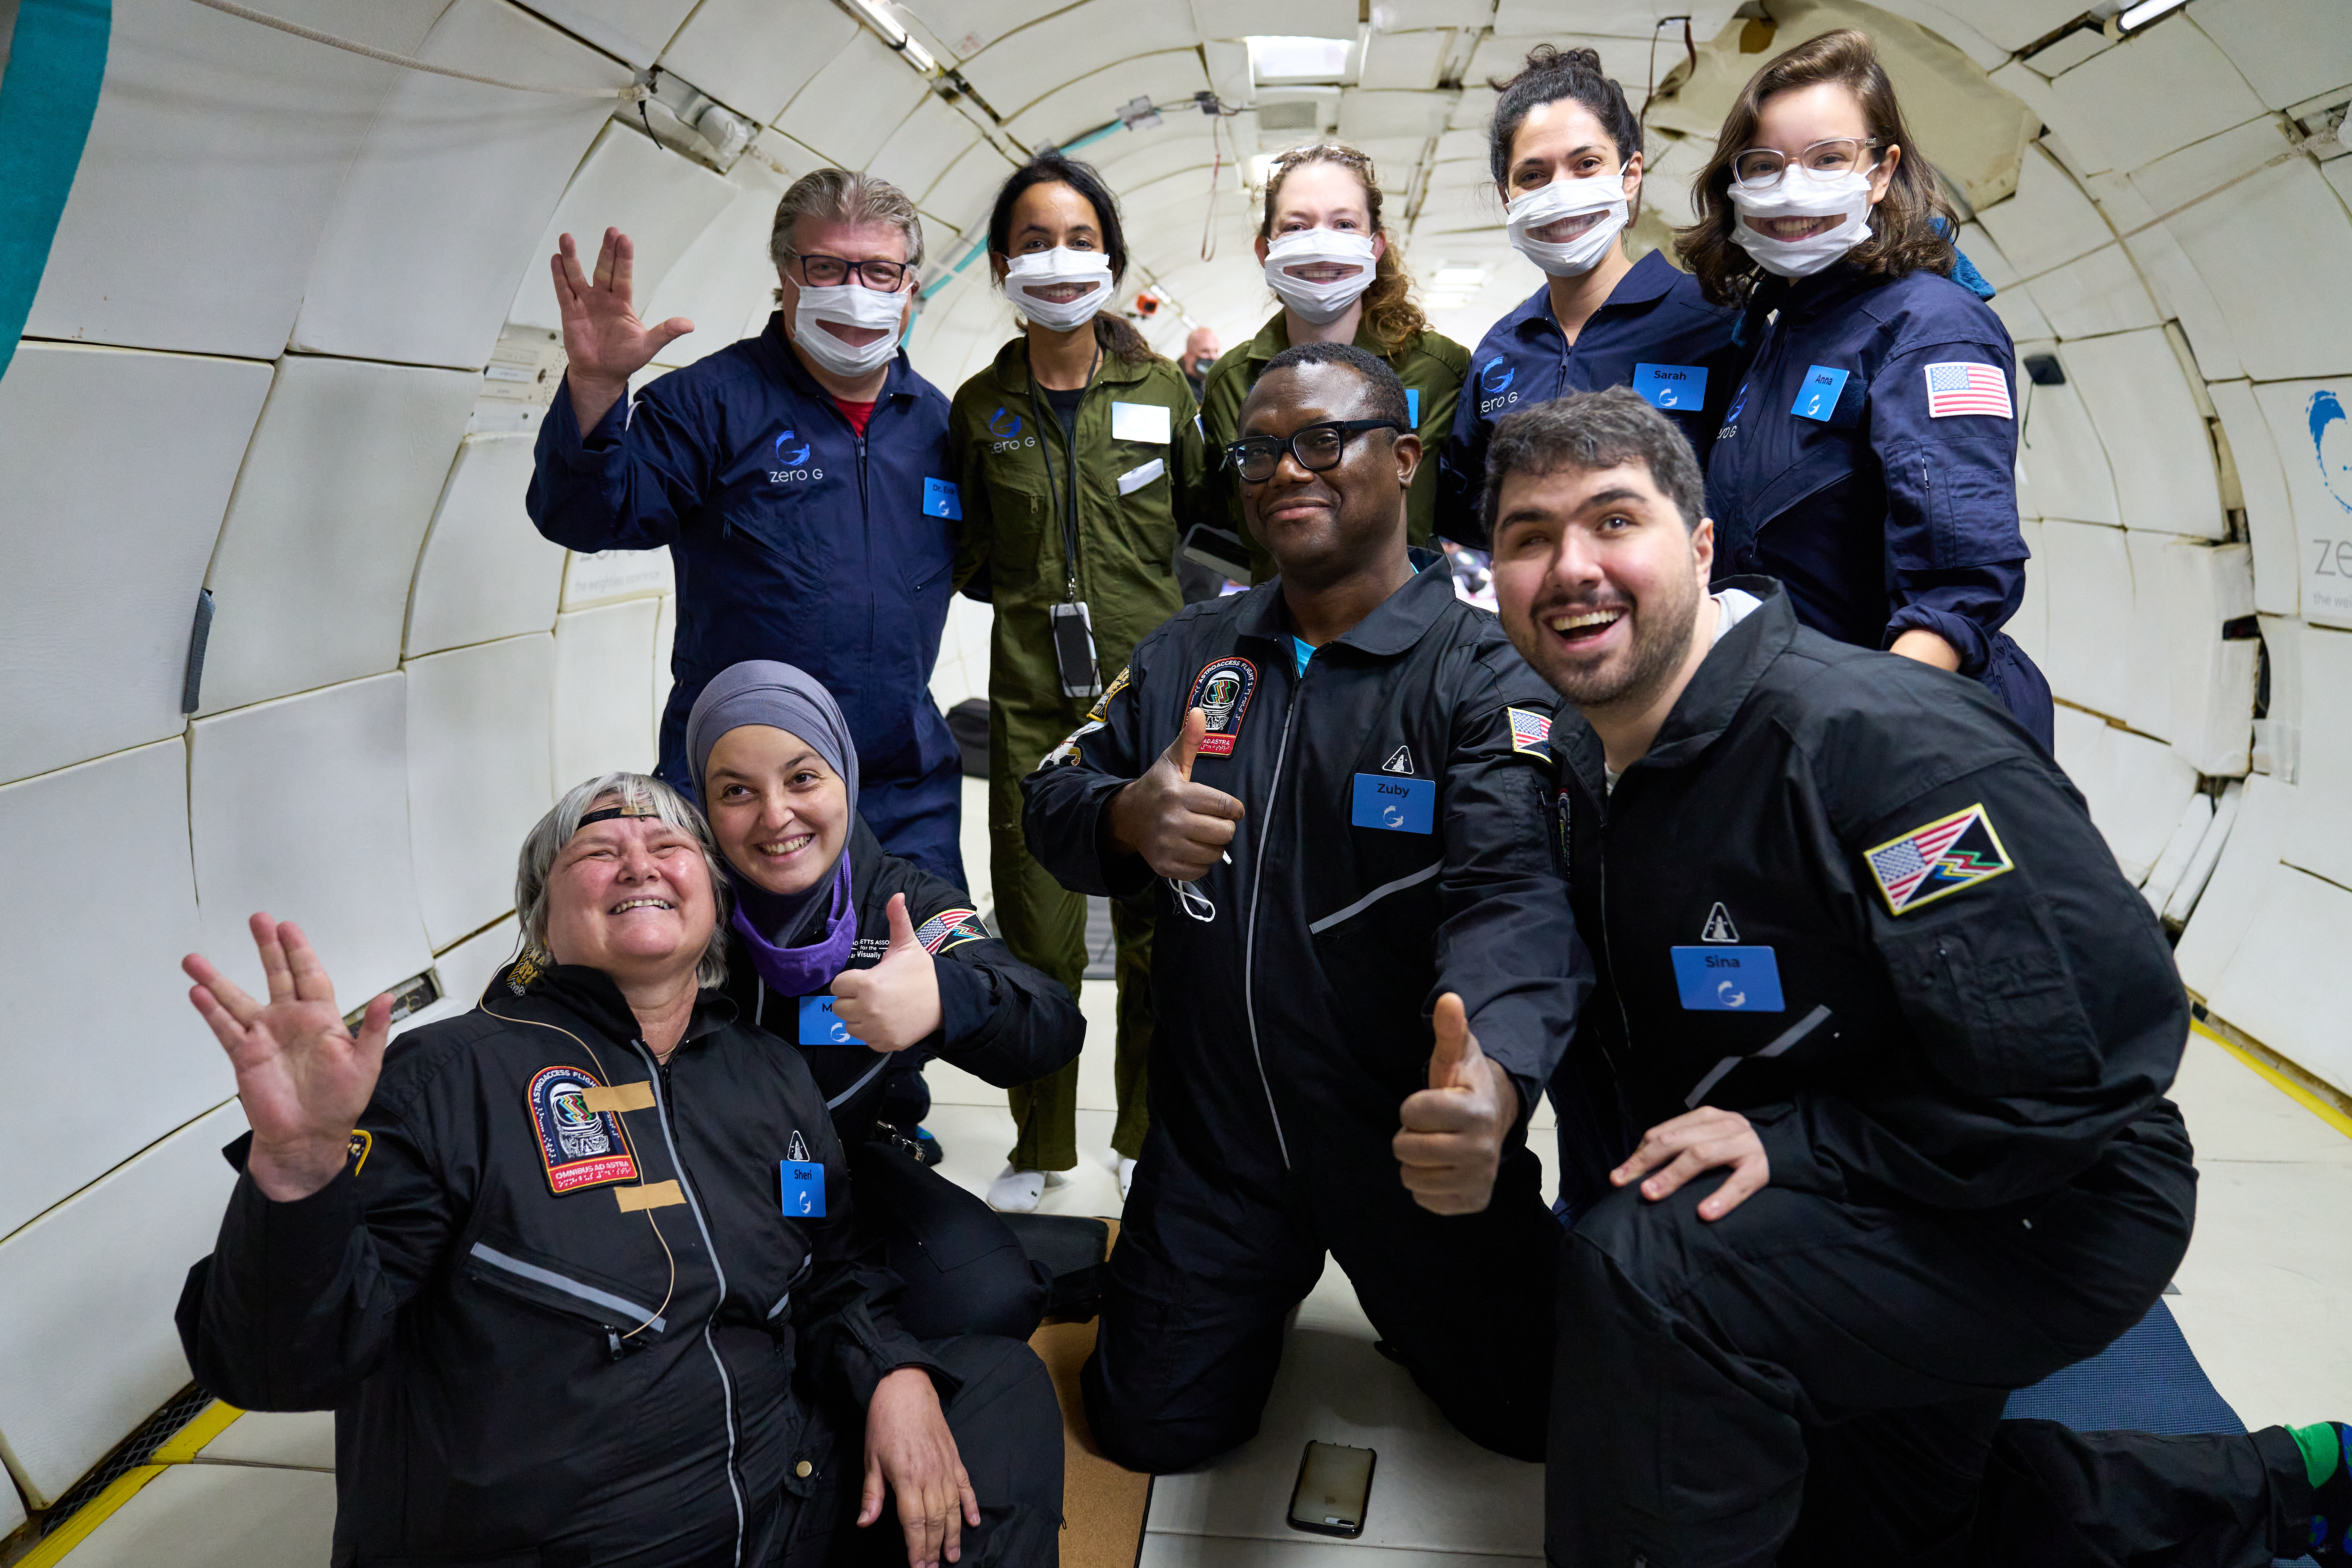 Dr. Sheri Wells-Jensen, Mona Minkara, Azubuike Onwuta, and Sina Bahram (left to right) sitting and kneeling on zero gravity plane smiling at camera with 5 support team members also smiling through their cut masks standing behind them. 
                        